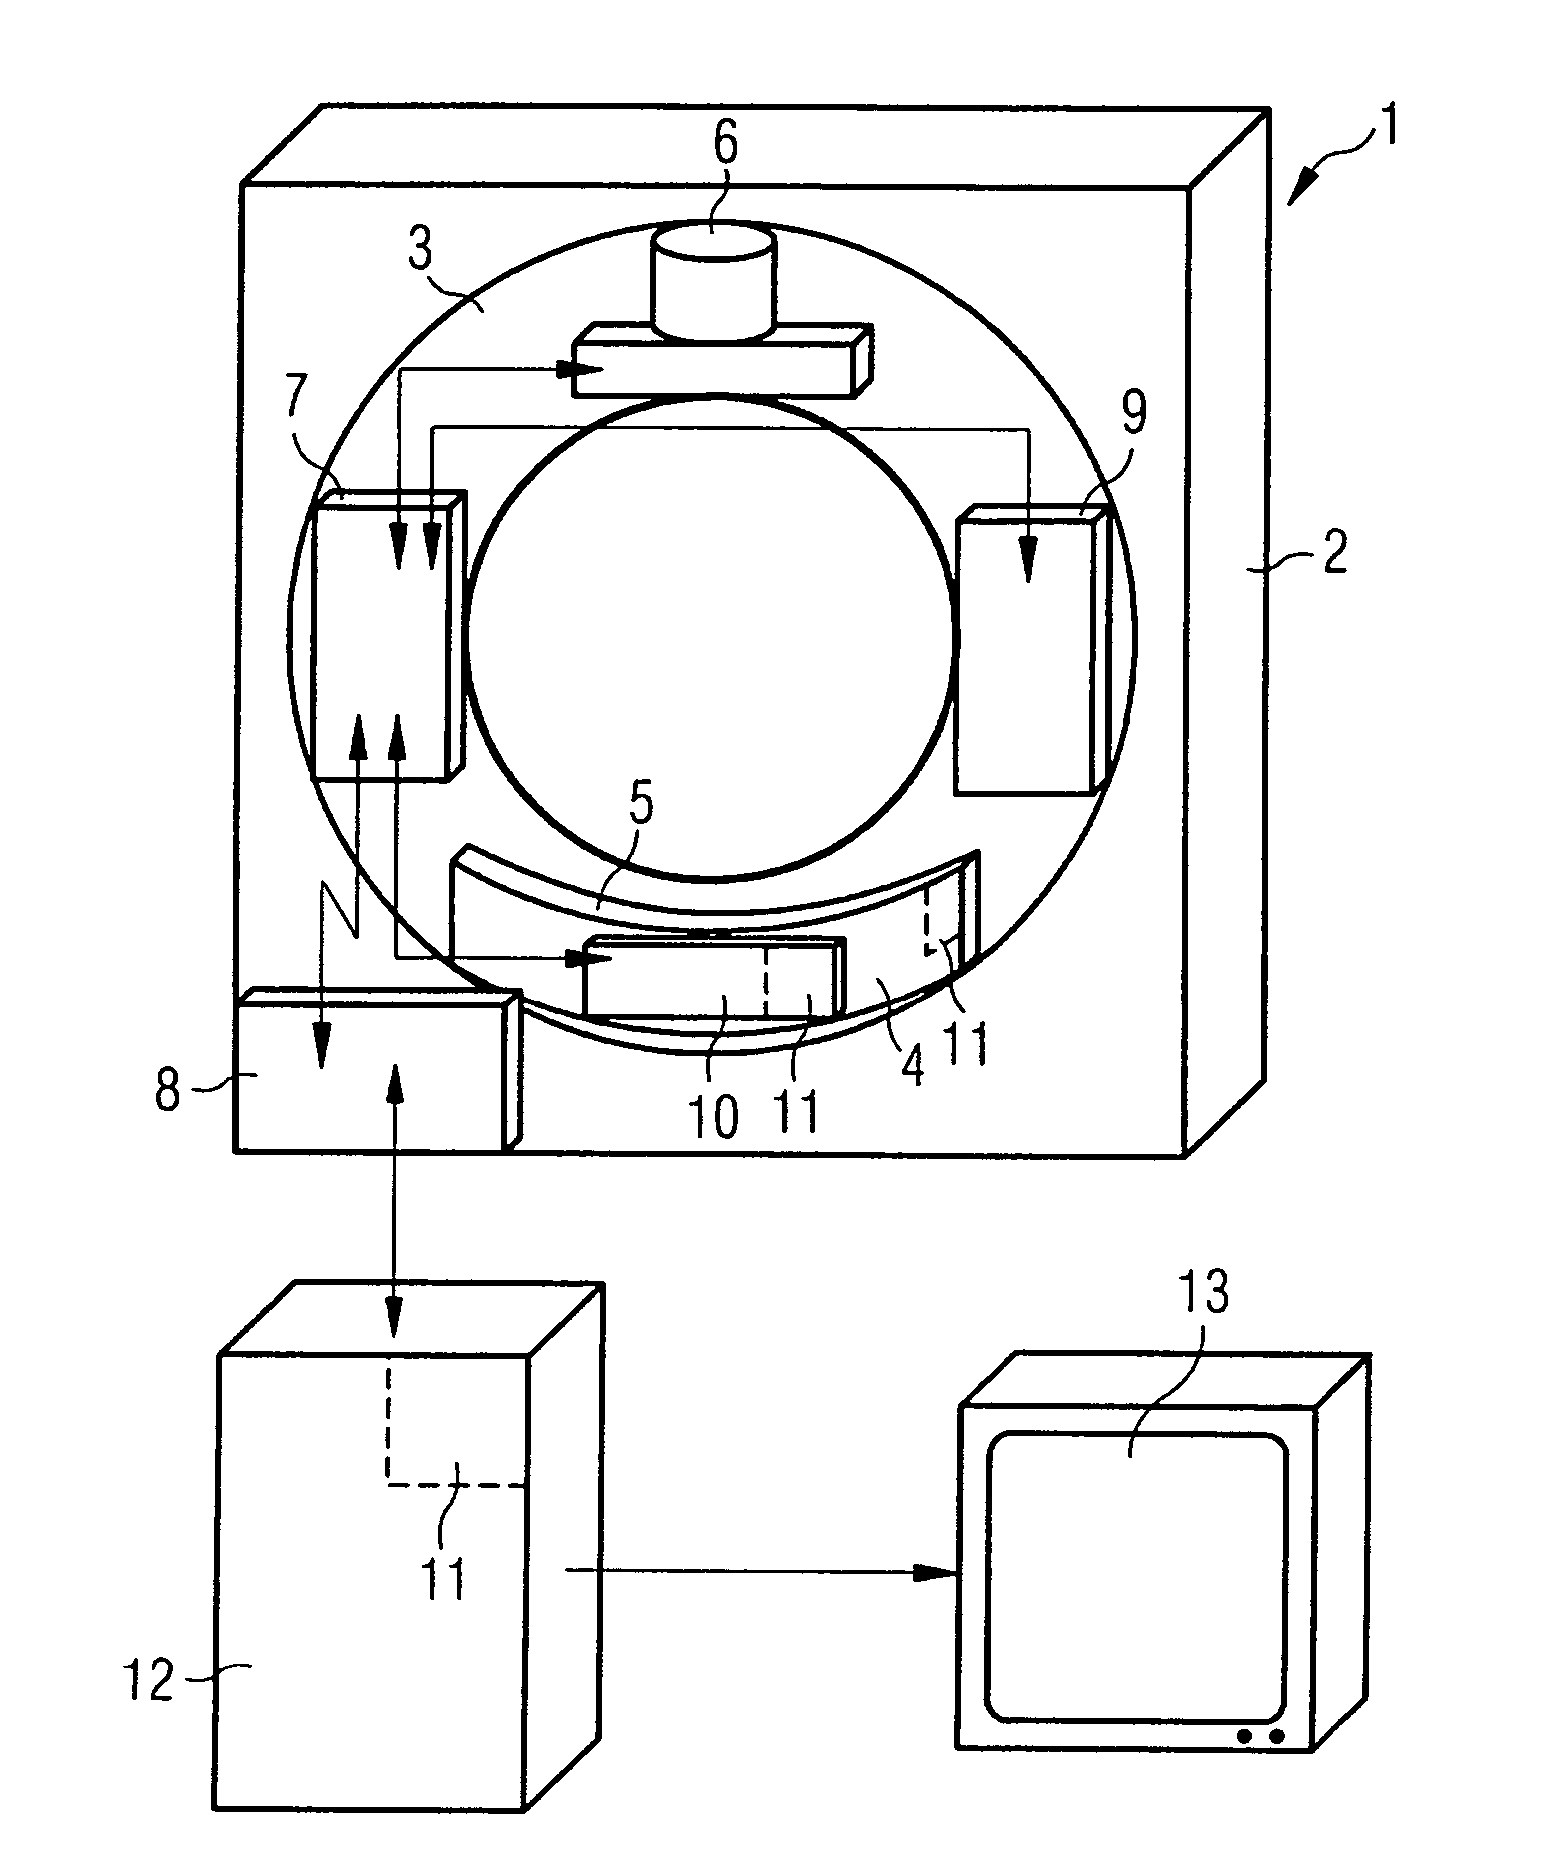 Method for operation of a counting radiation detector with improved linearity